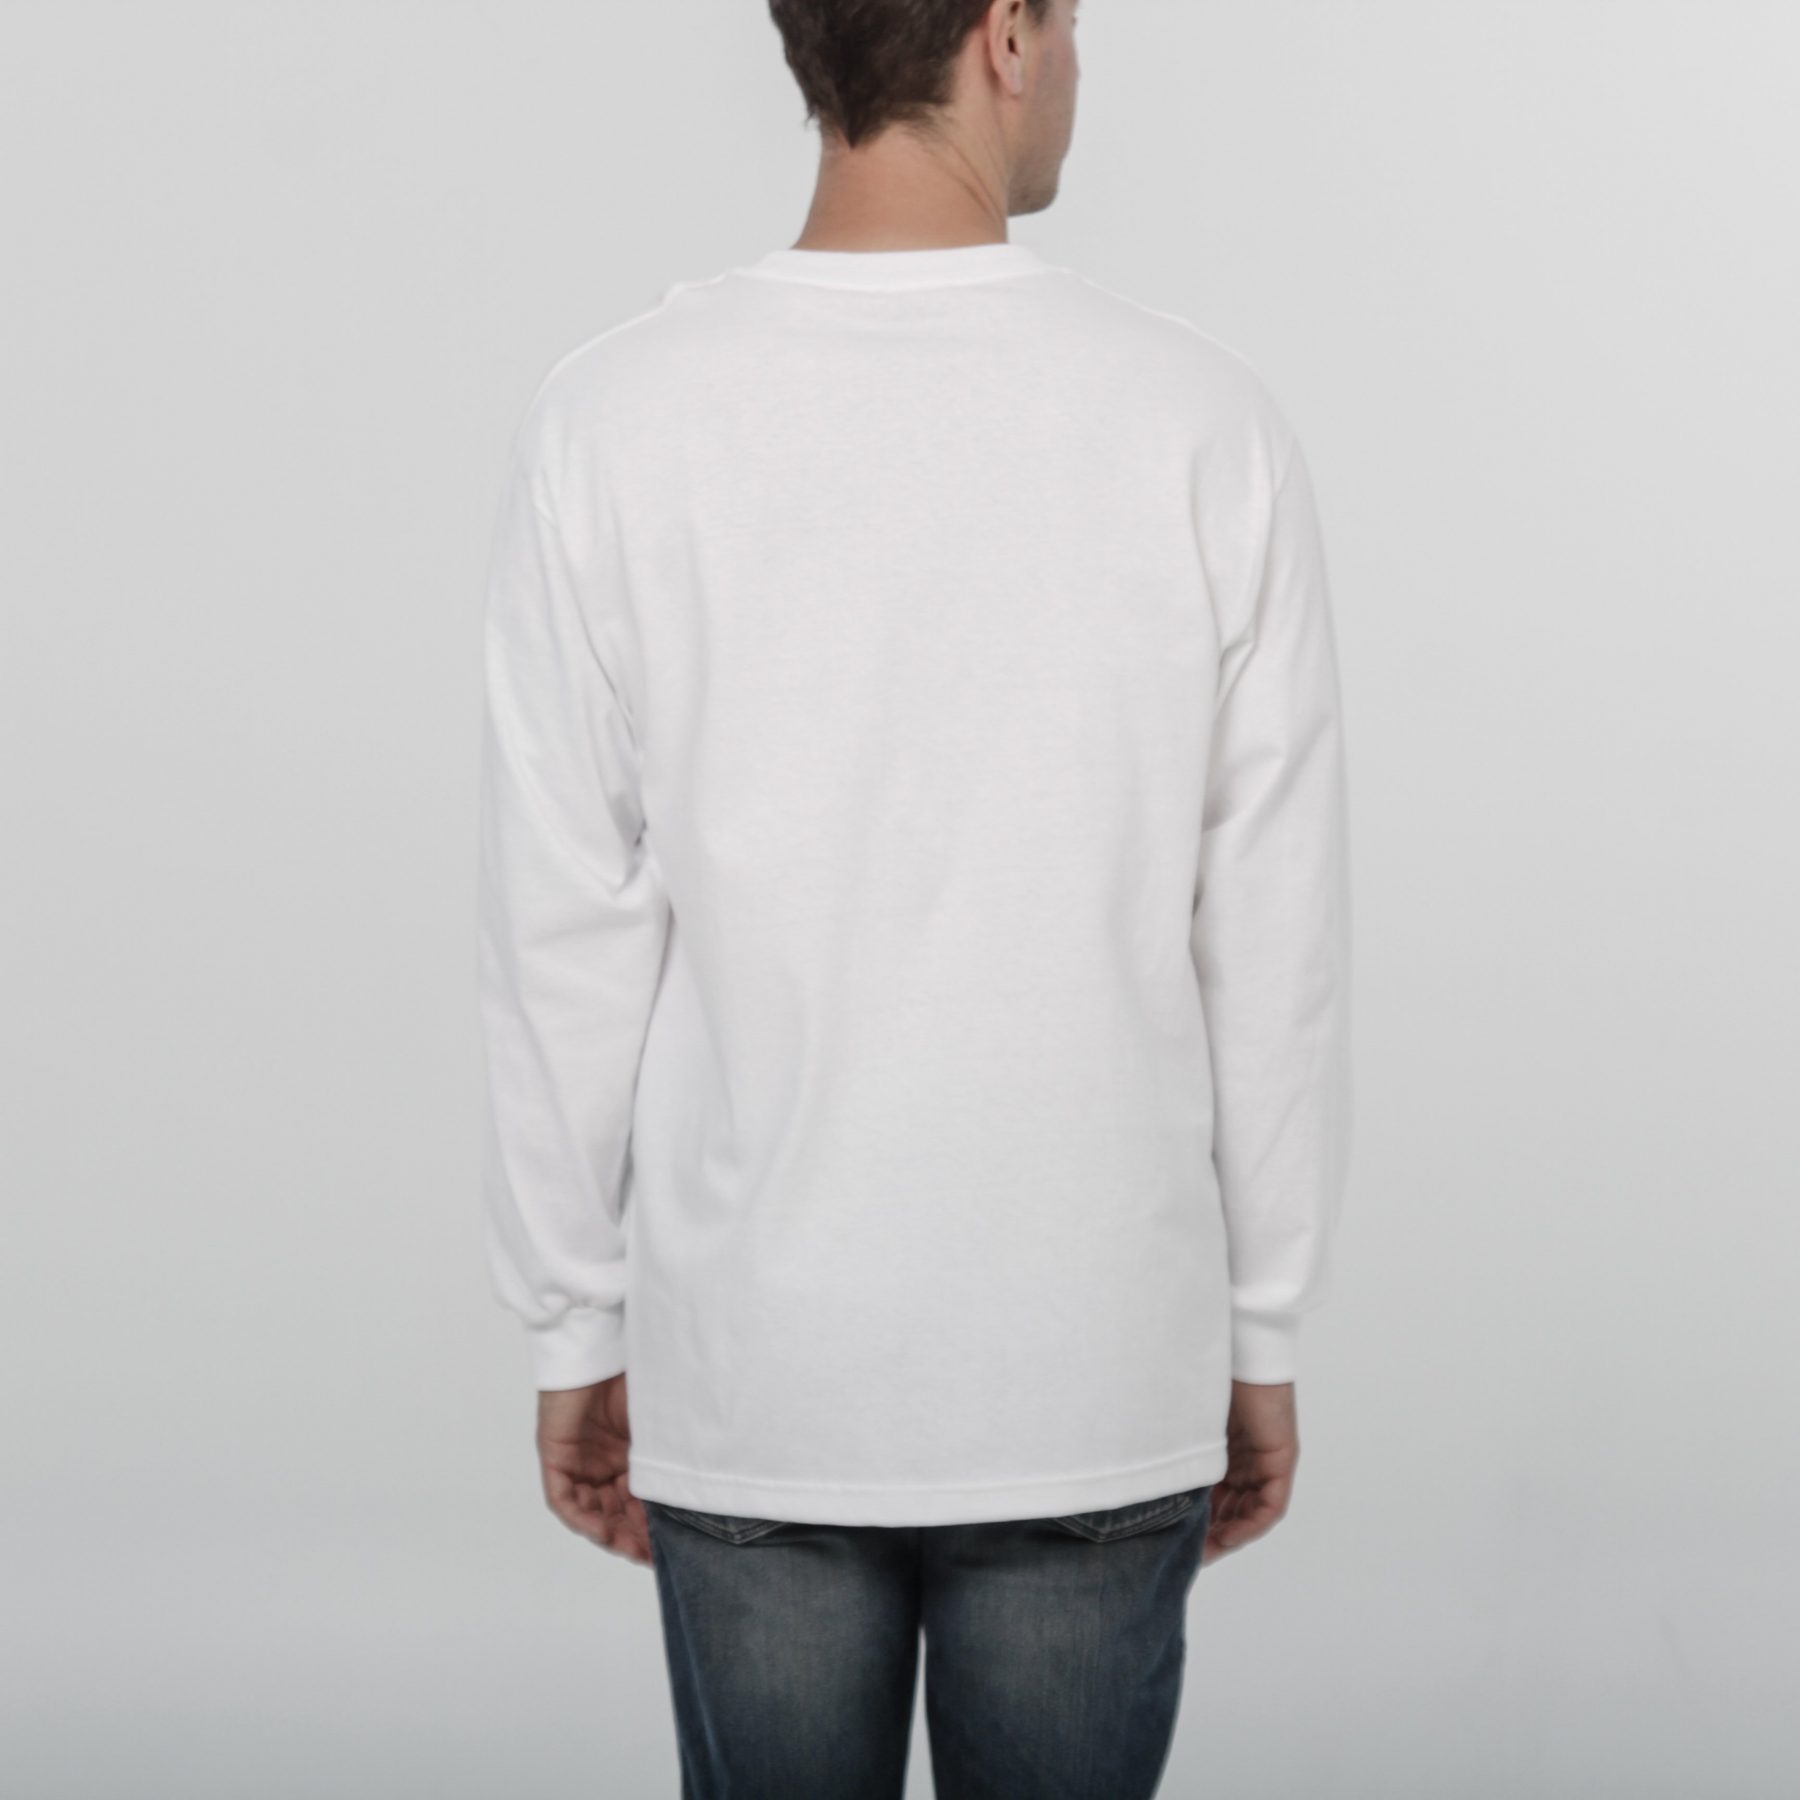 Westy - Classic White Longsleeve - by Out of The